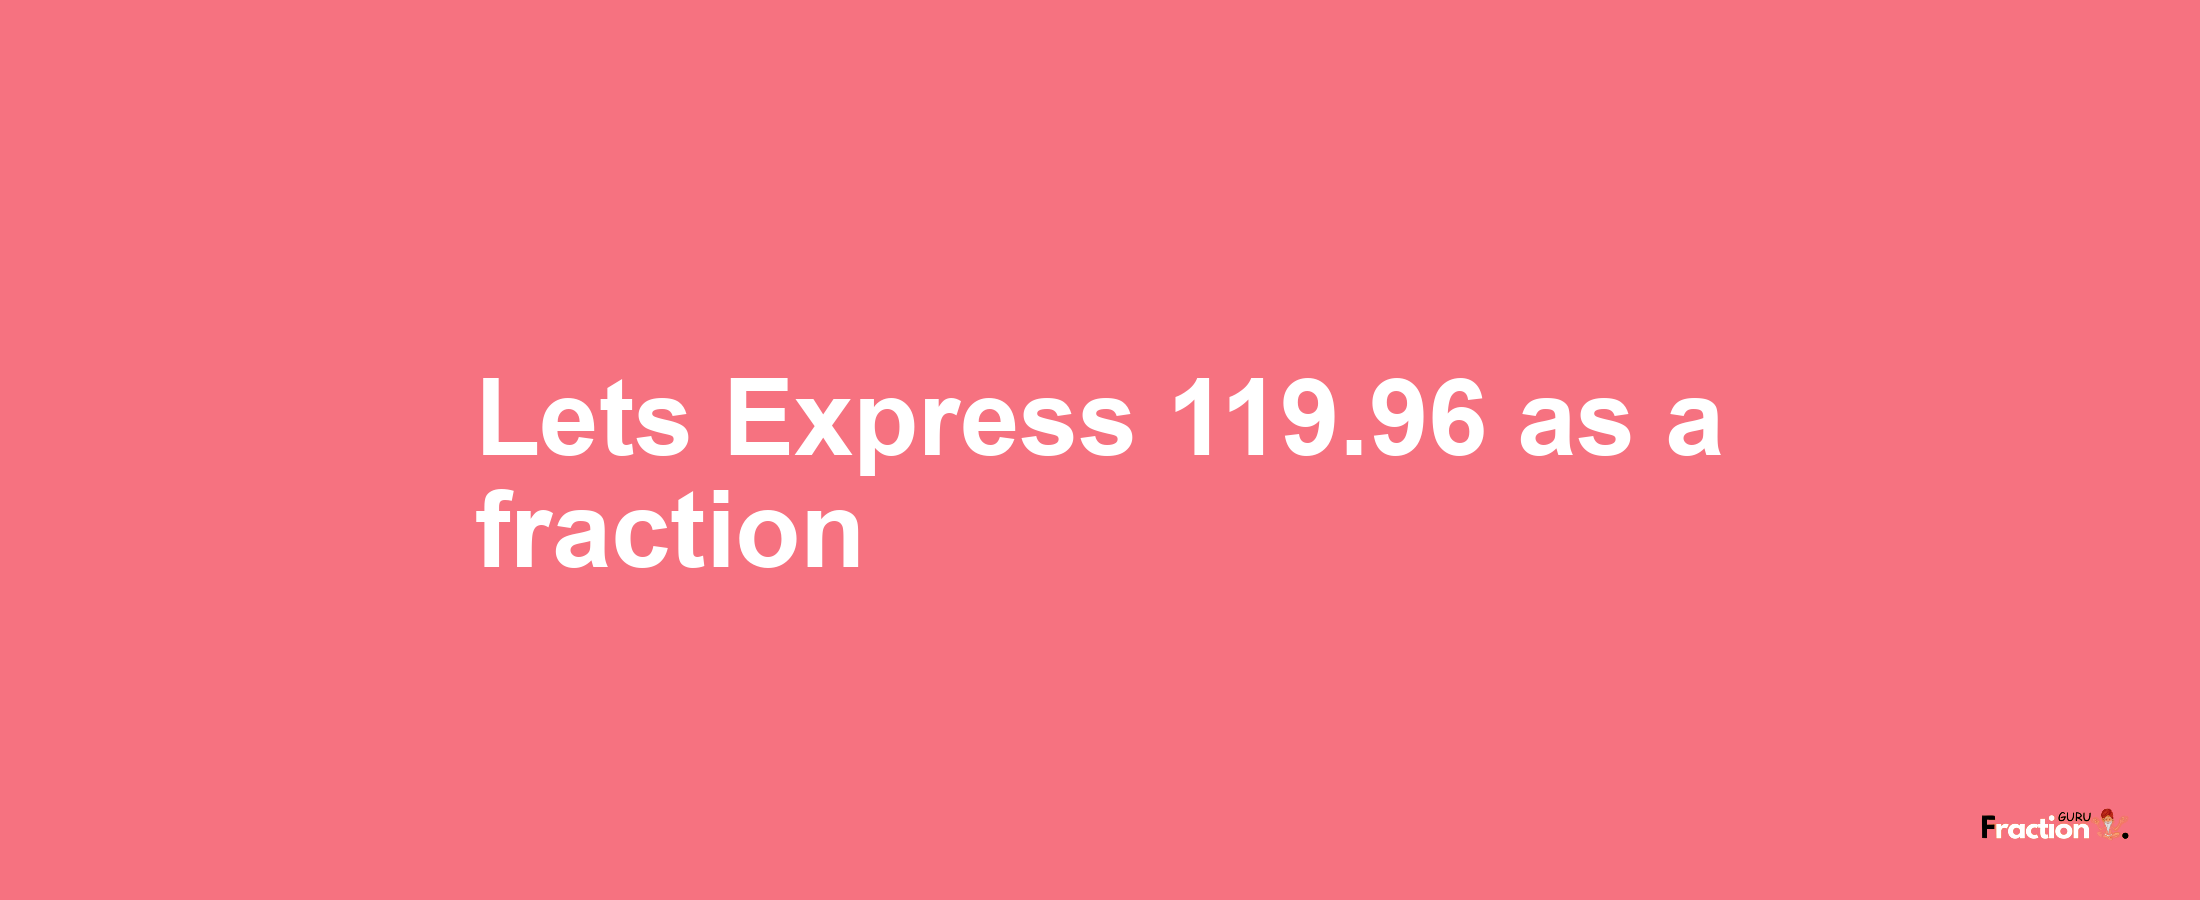 Lets Express 119.96 as afraction